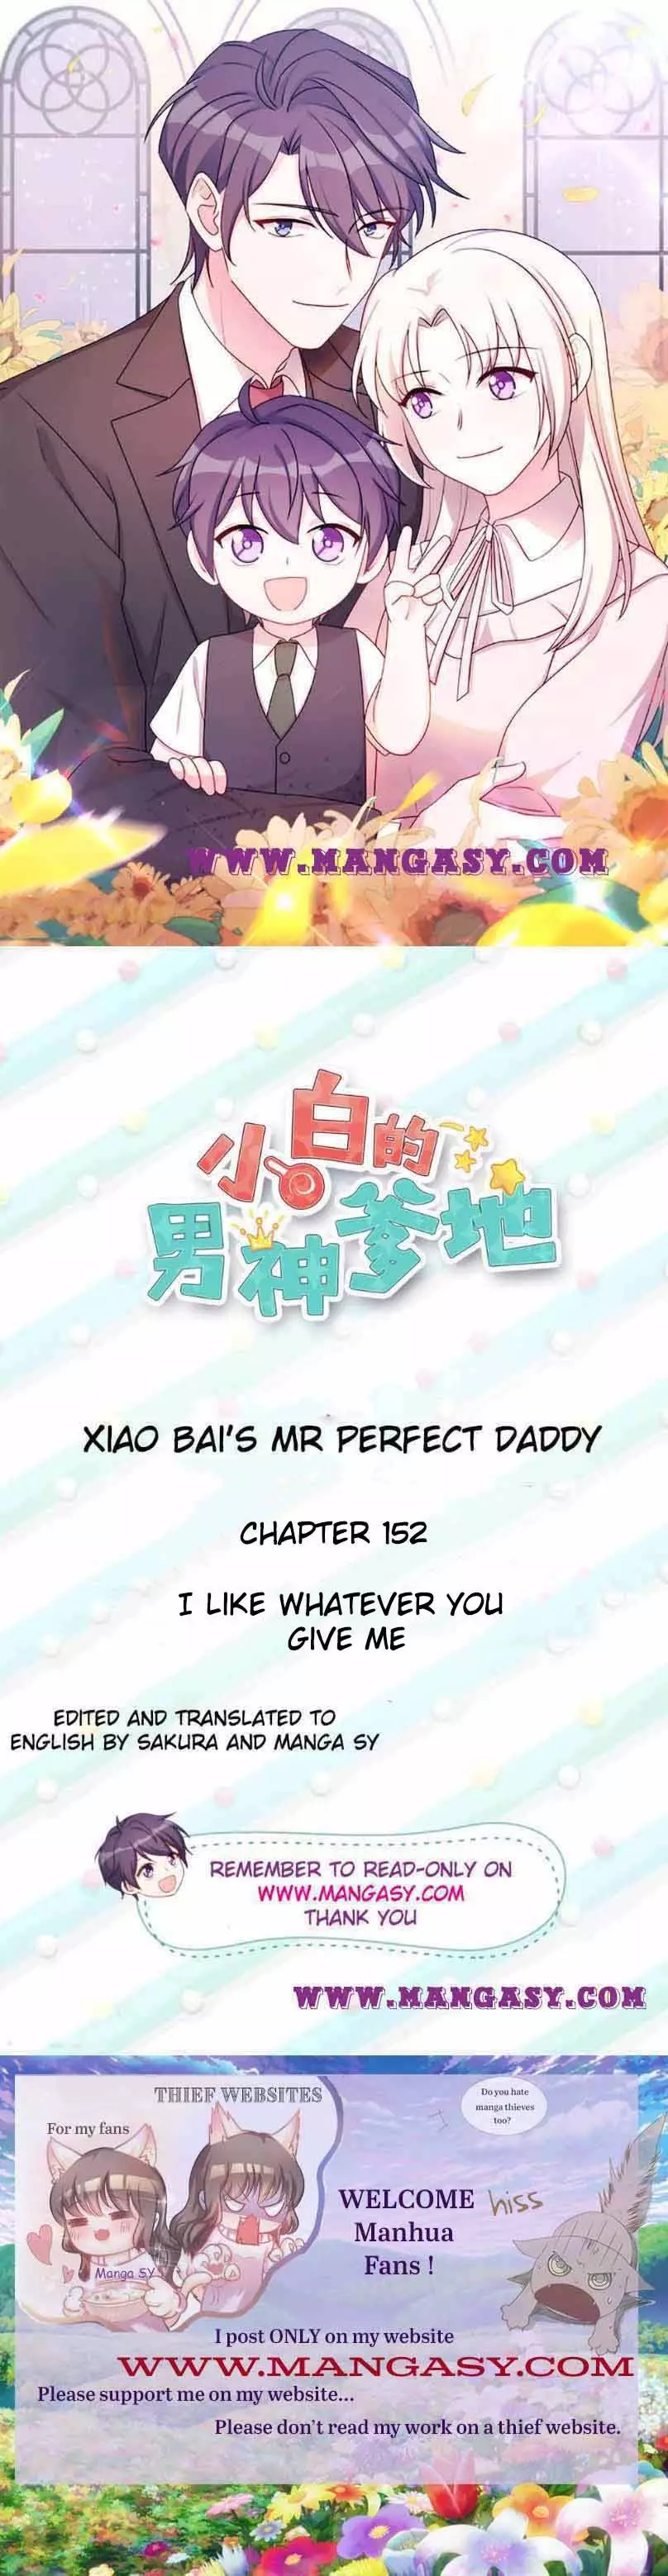 Xiao Bai’S Father Is A Wonderful Person - 152 page 1-9eb7c391